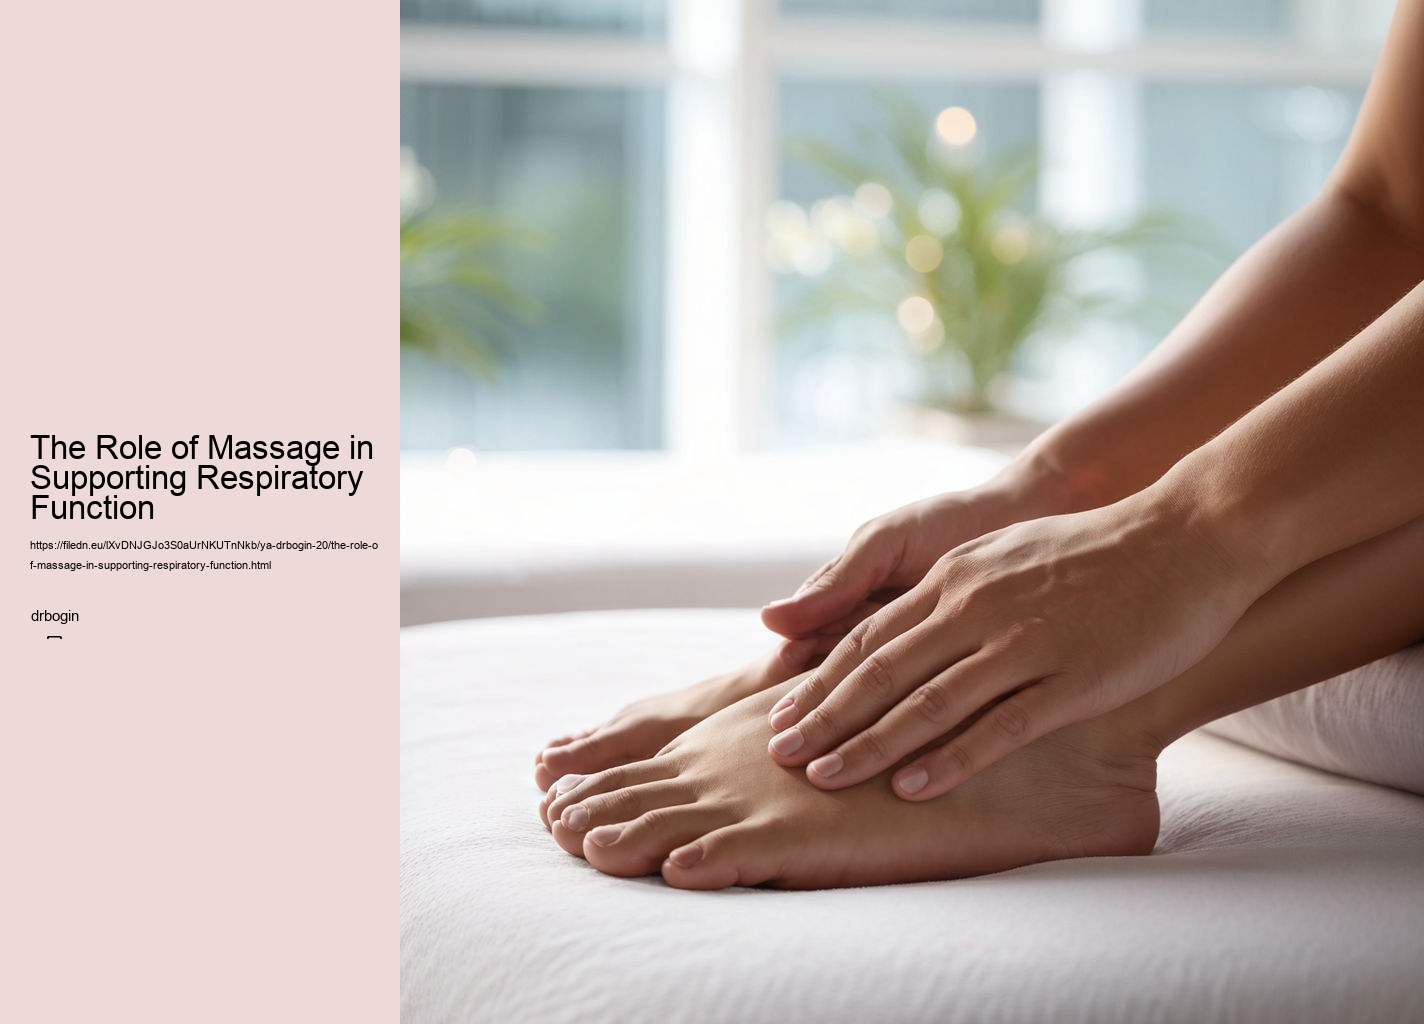 The Role of Massage in Supporting Respiratory Function